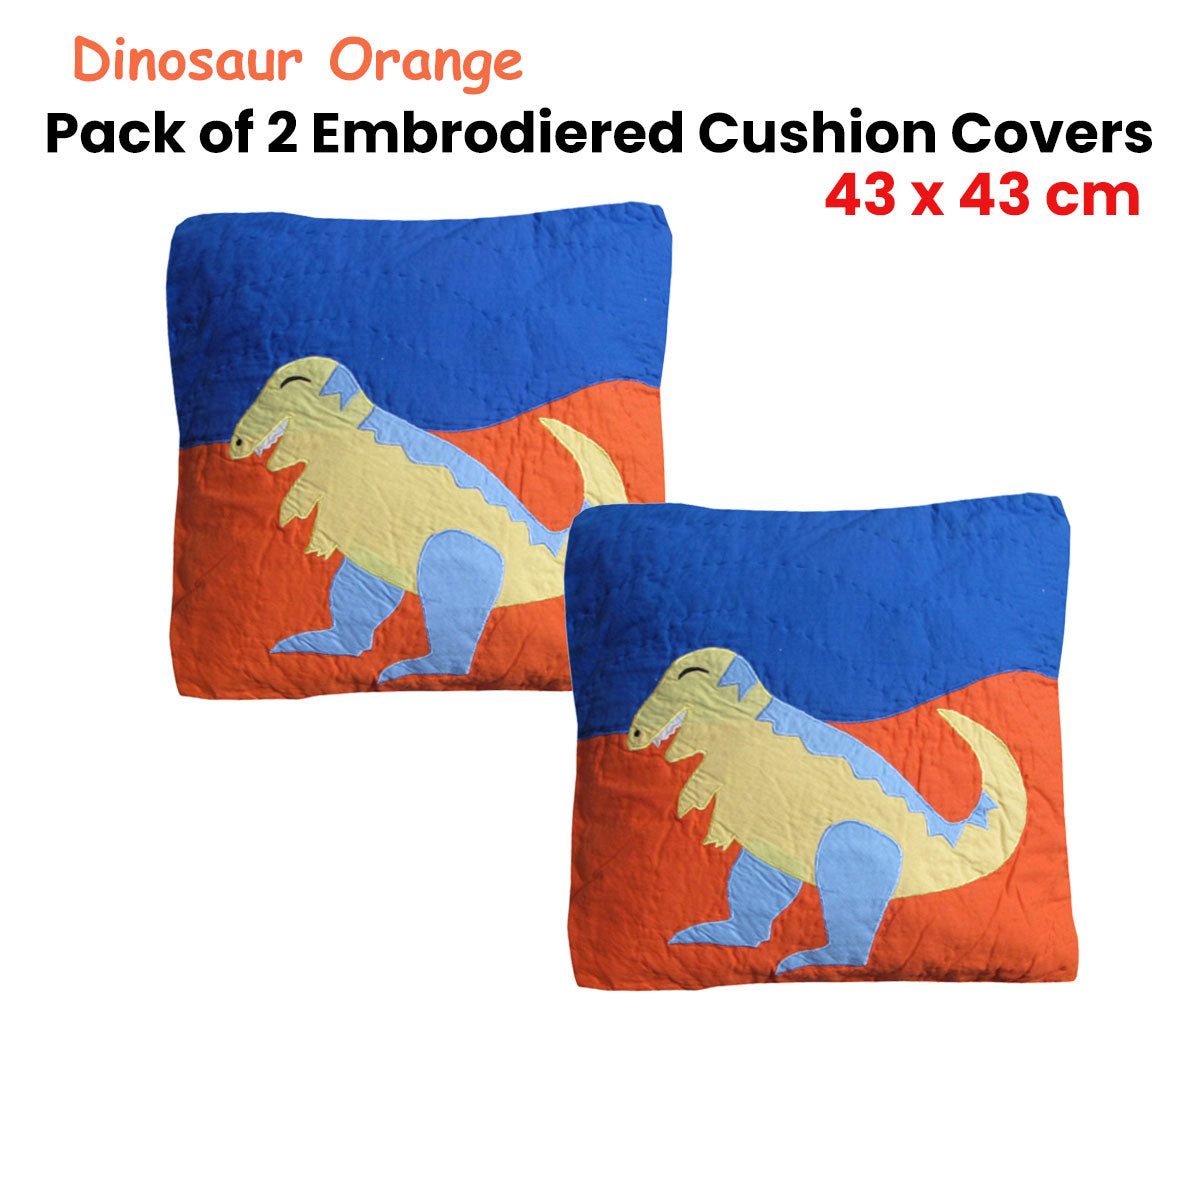 Pack of 2 Dinosaur Embroidered Quilted Cushion Covers 43 x 43 cm - Newstart Furniture